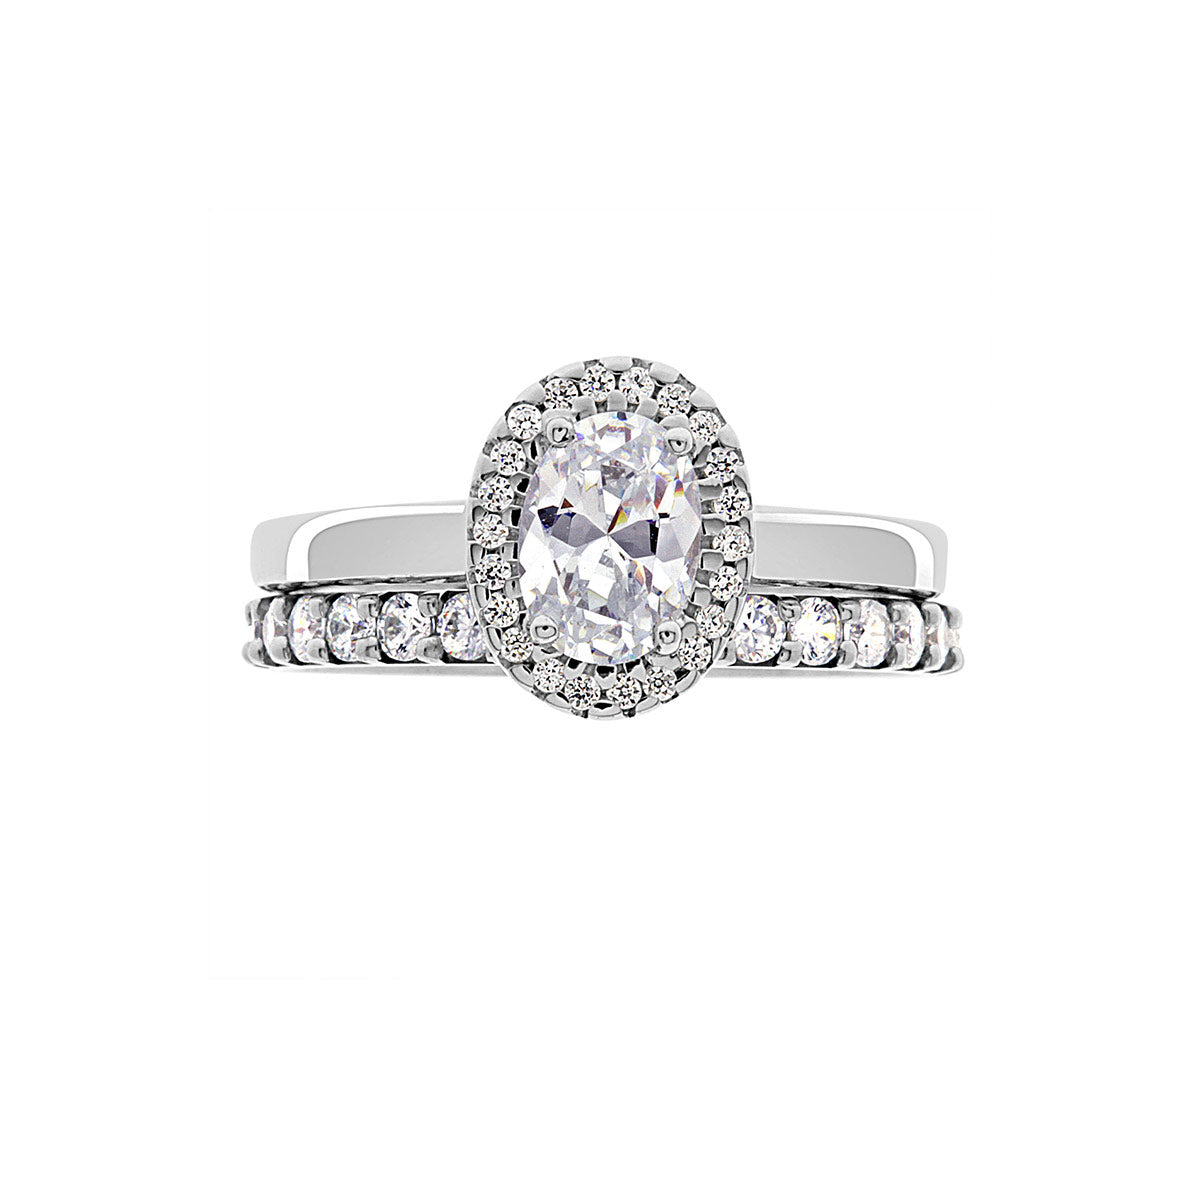 Oval Vintage Engagement Ring in white gold pictured with a diamond set wedding ring